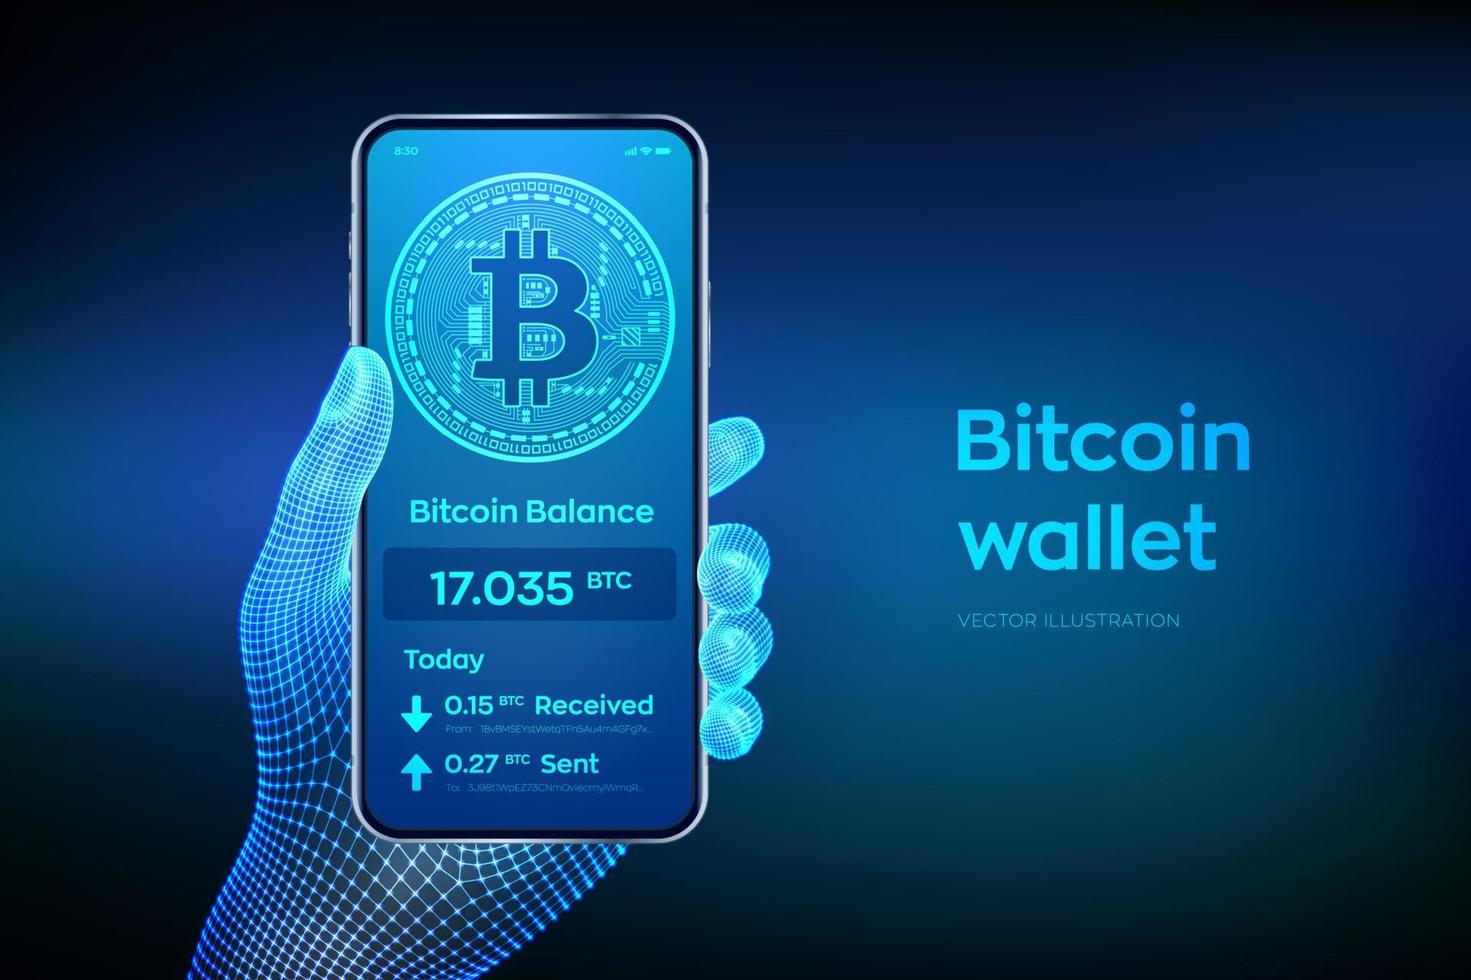 Bitcoin wallet interface on smartphone screen. Cryptocurrency payments and blockchain technology based digital money concept. Closeup mobile phone in wireframe hand. Vector illustration.